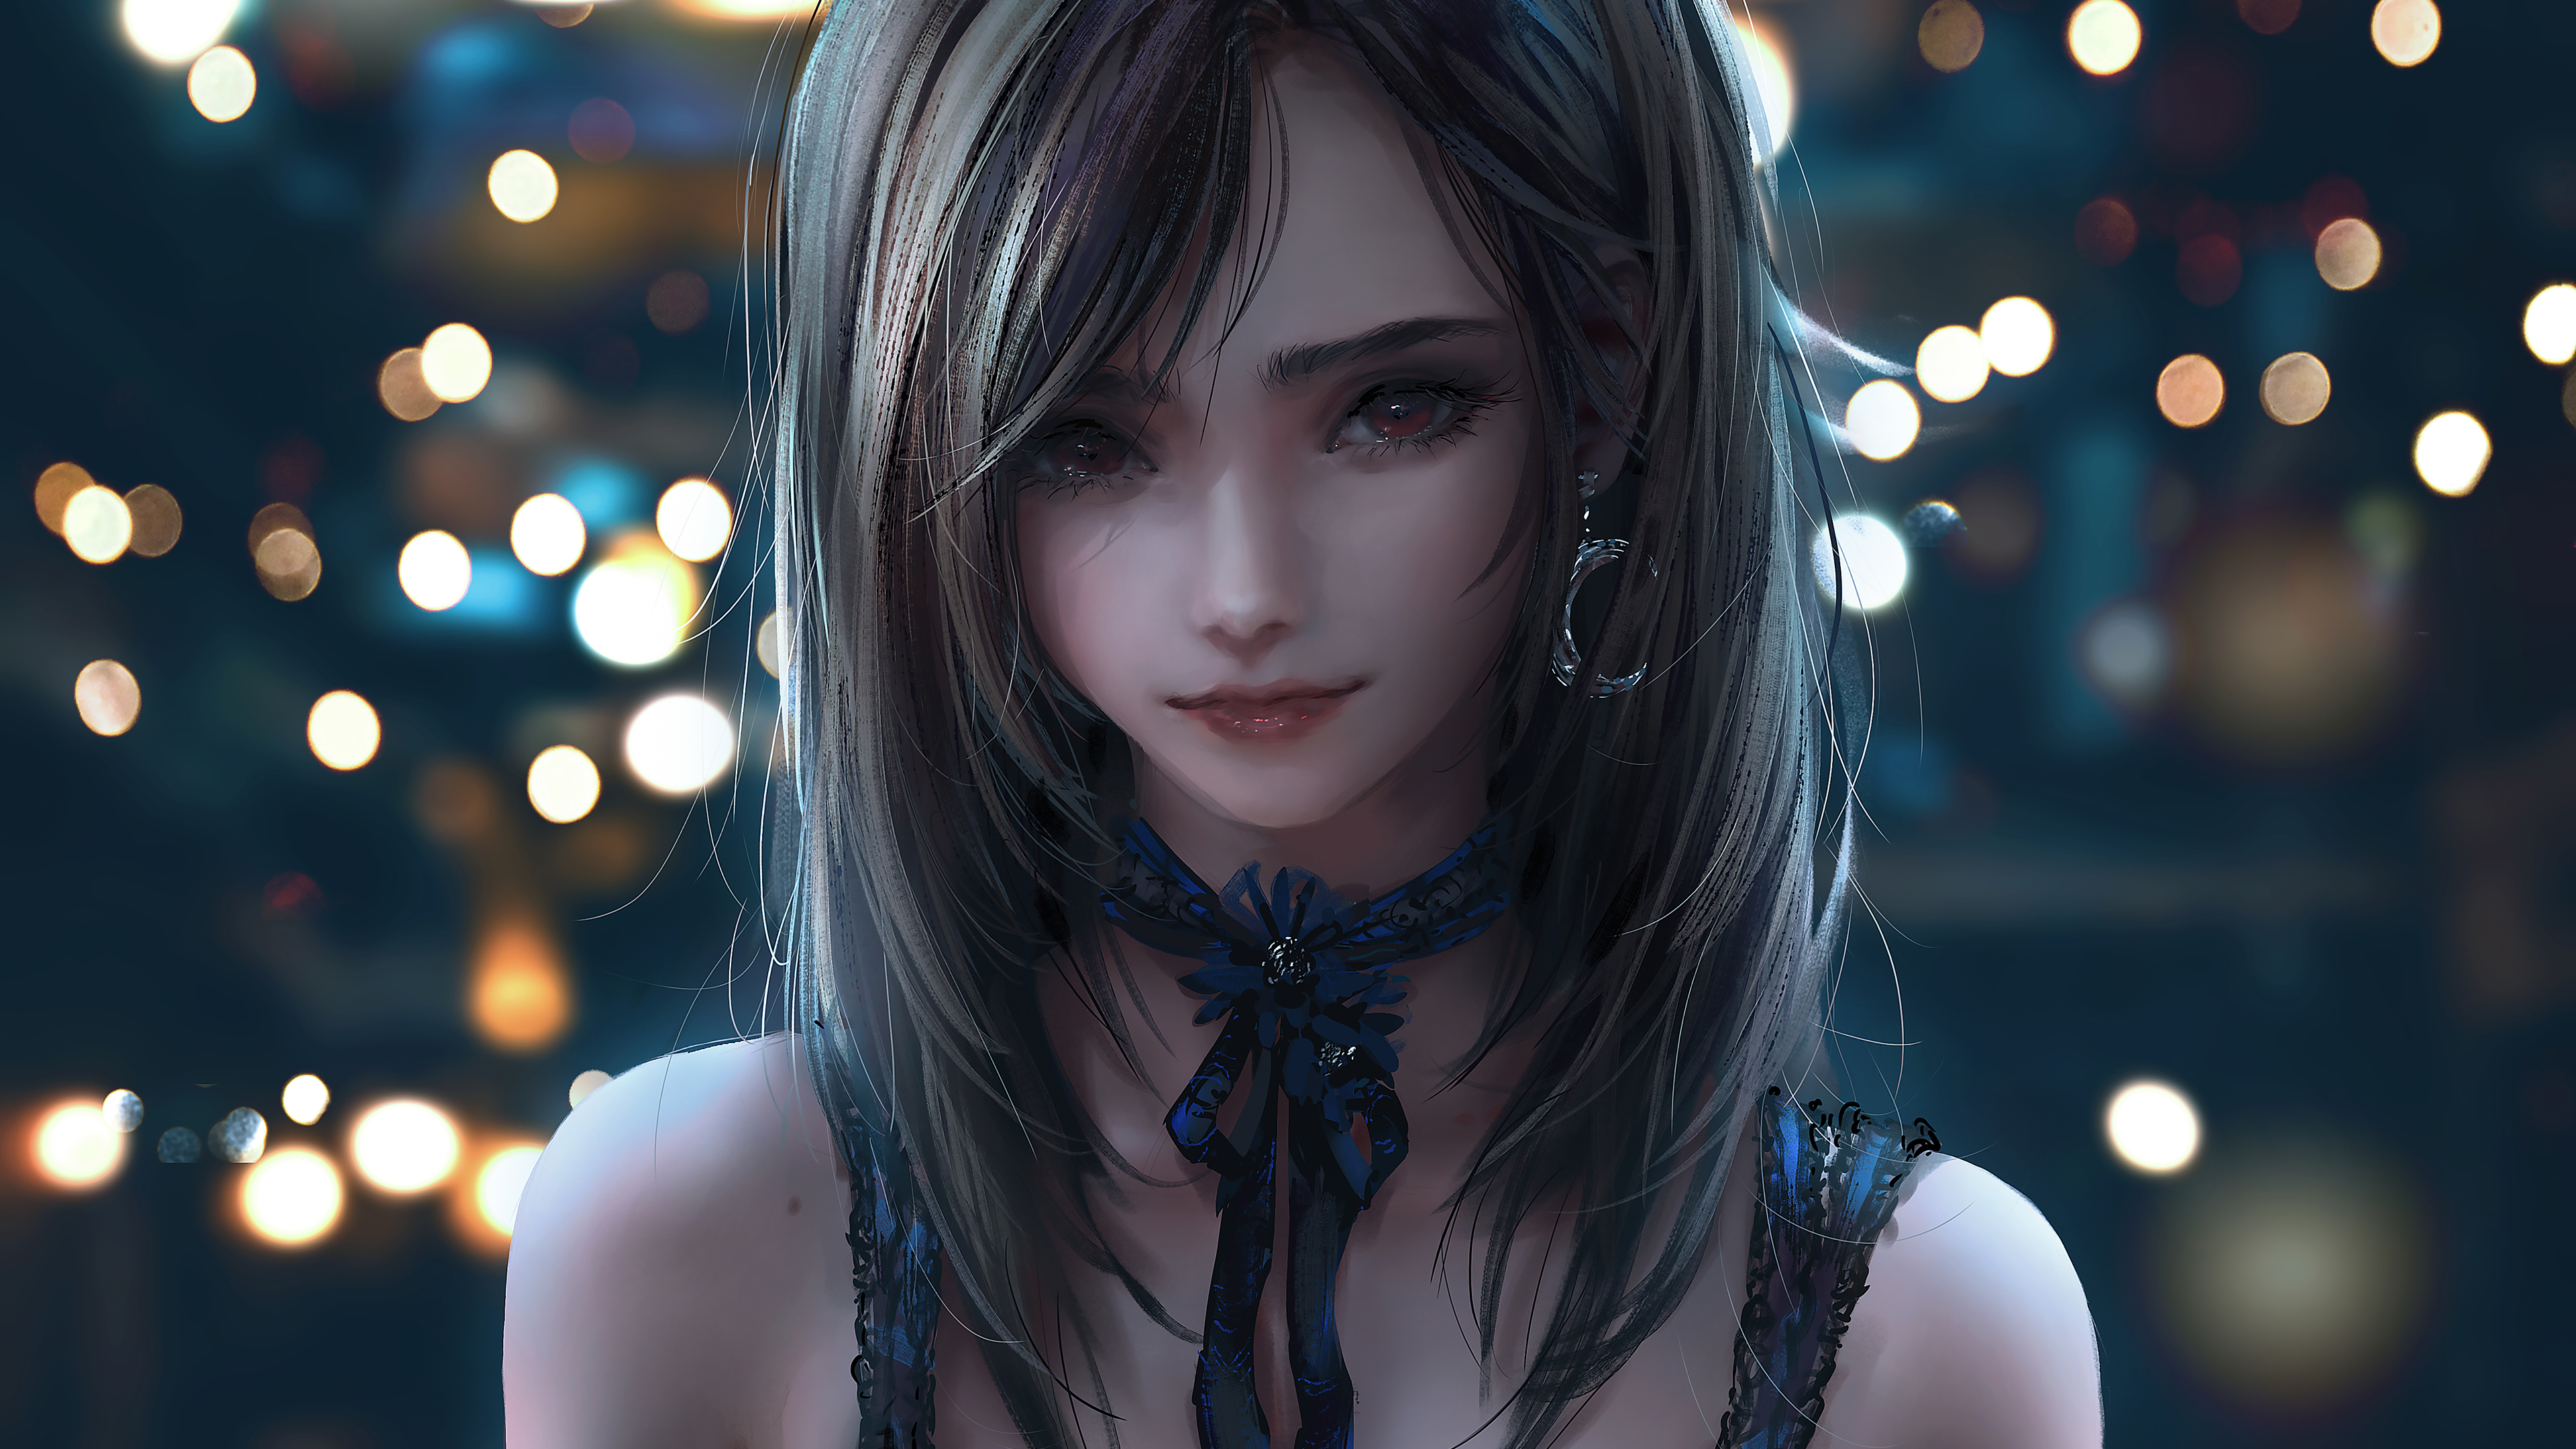 21 Tifa Lockhart Wallpapers for iPhone and Android by Anna Smith